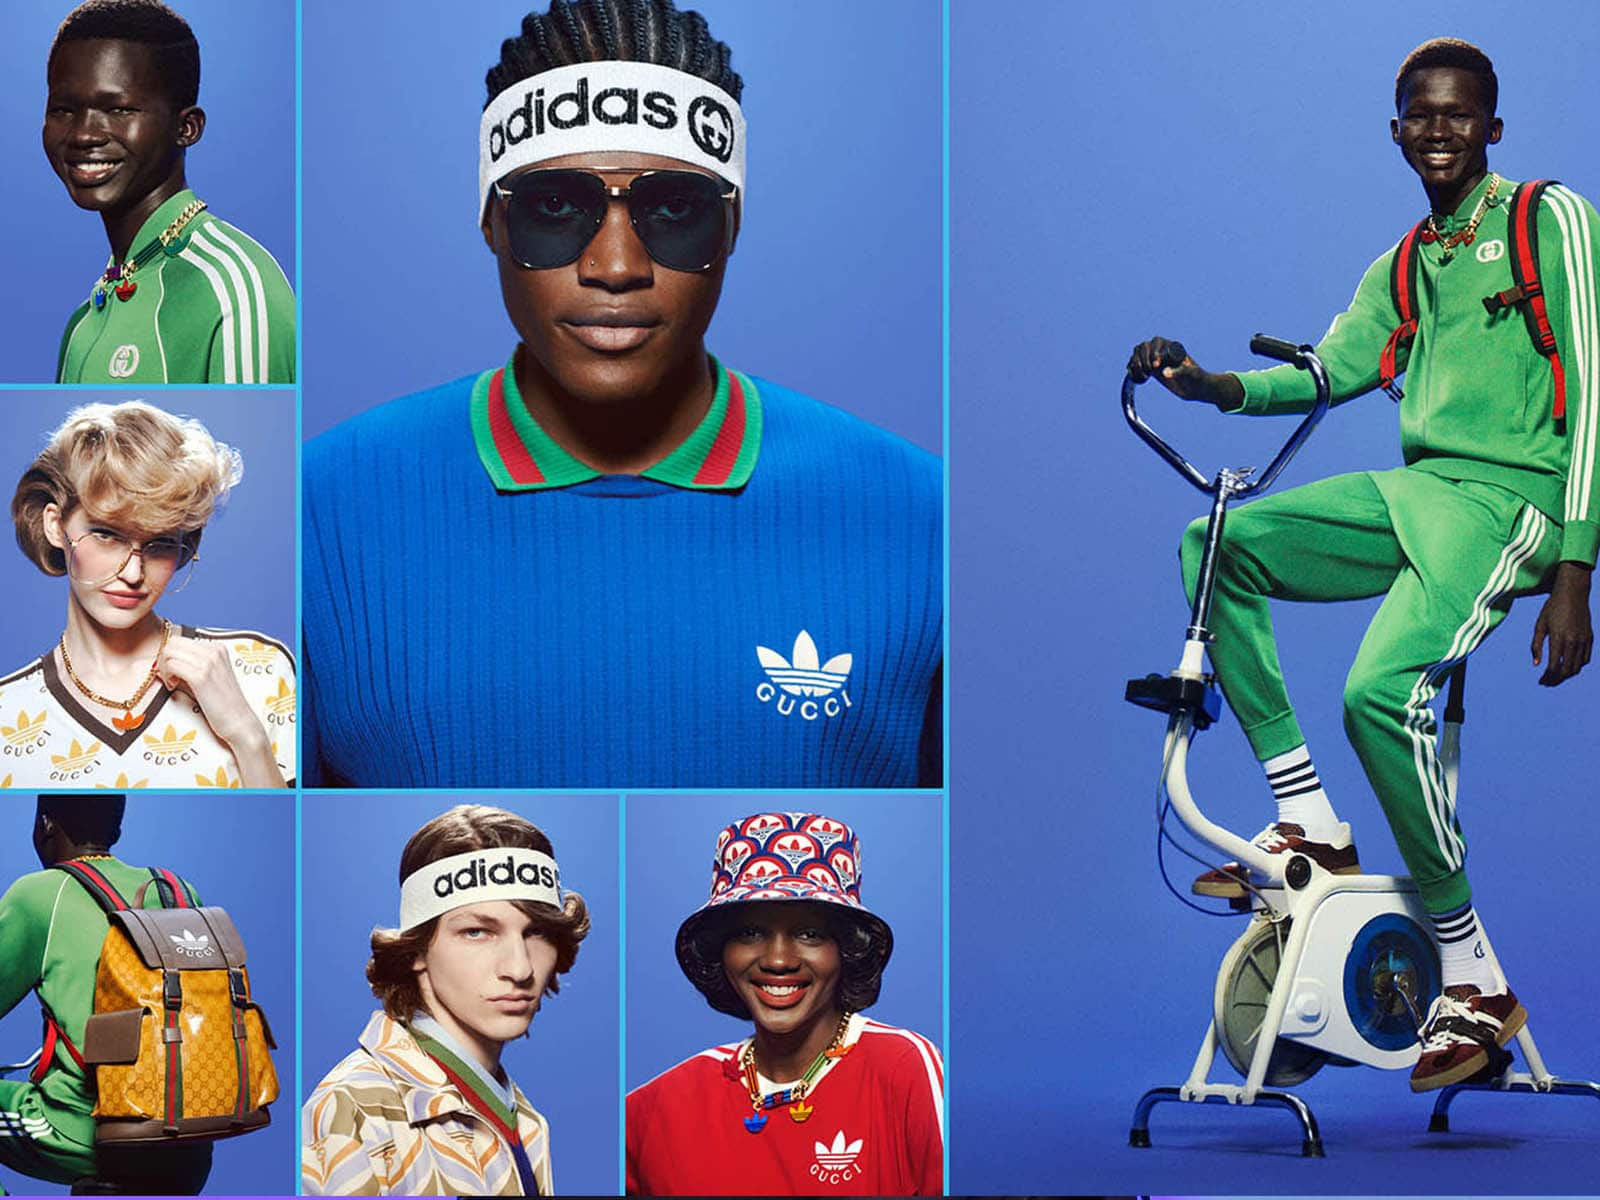 The long awaited adidas x Gucci campaign is here